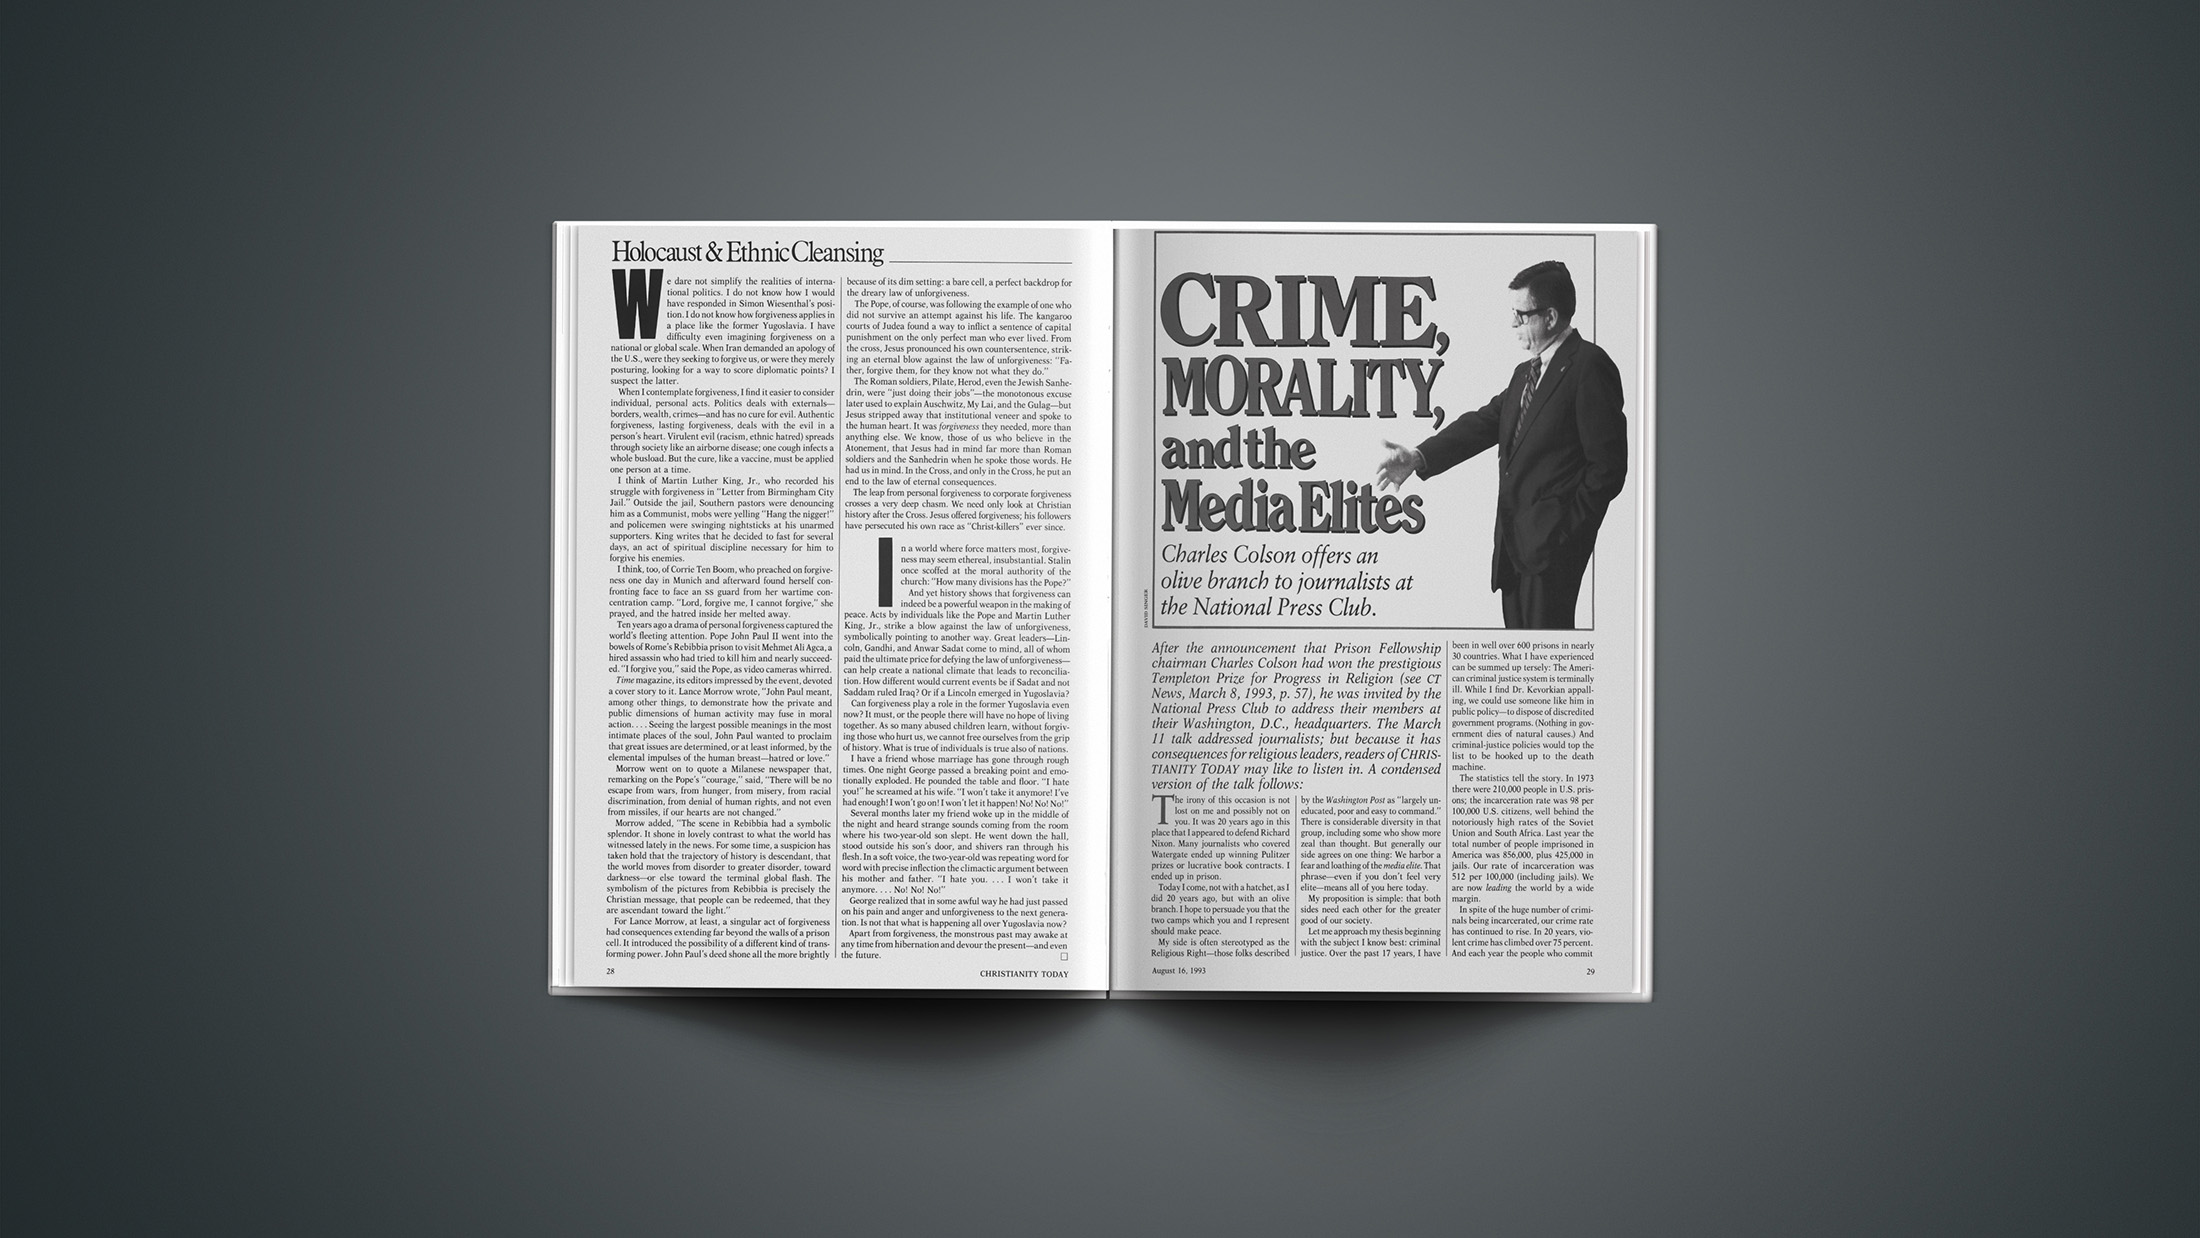 Crime, Morality, and the Media Elites | Christianity Today